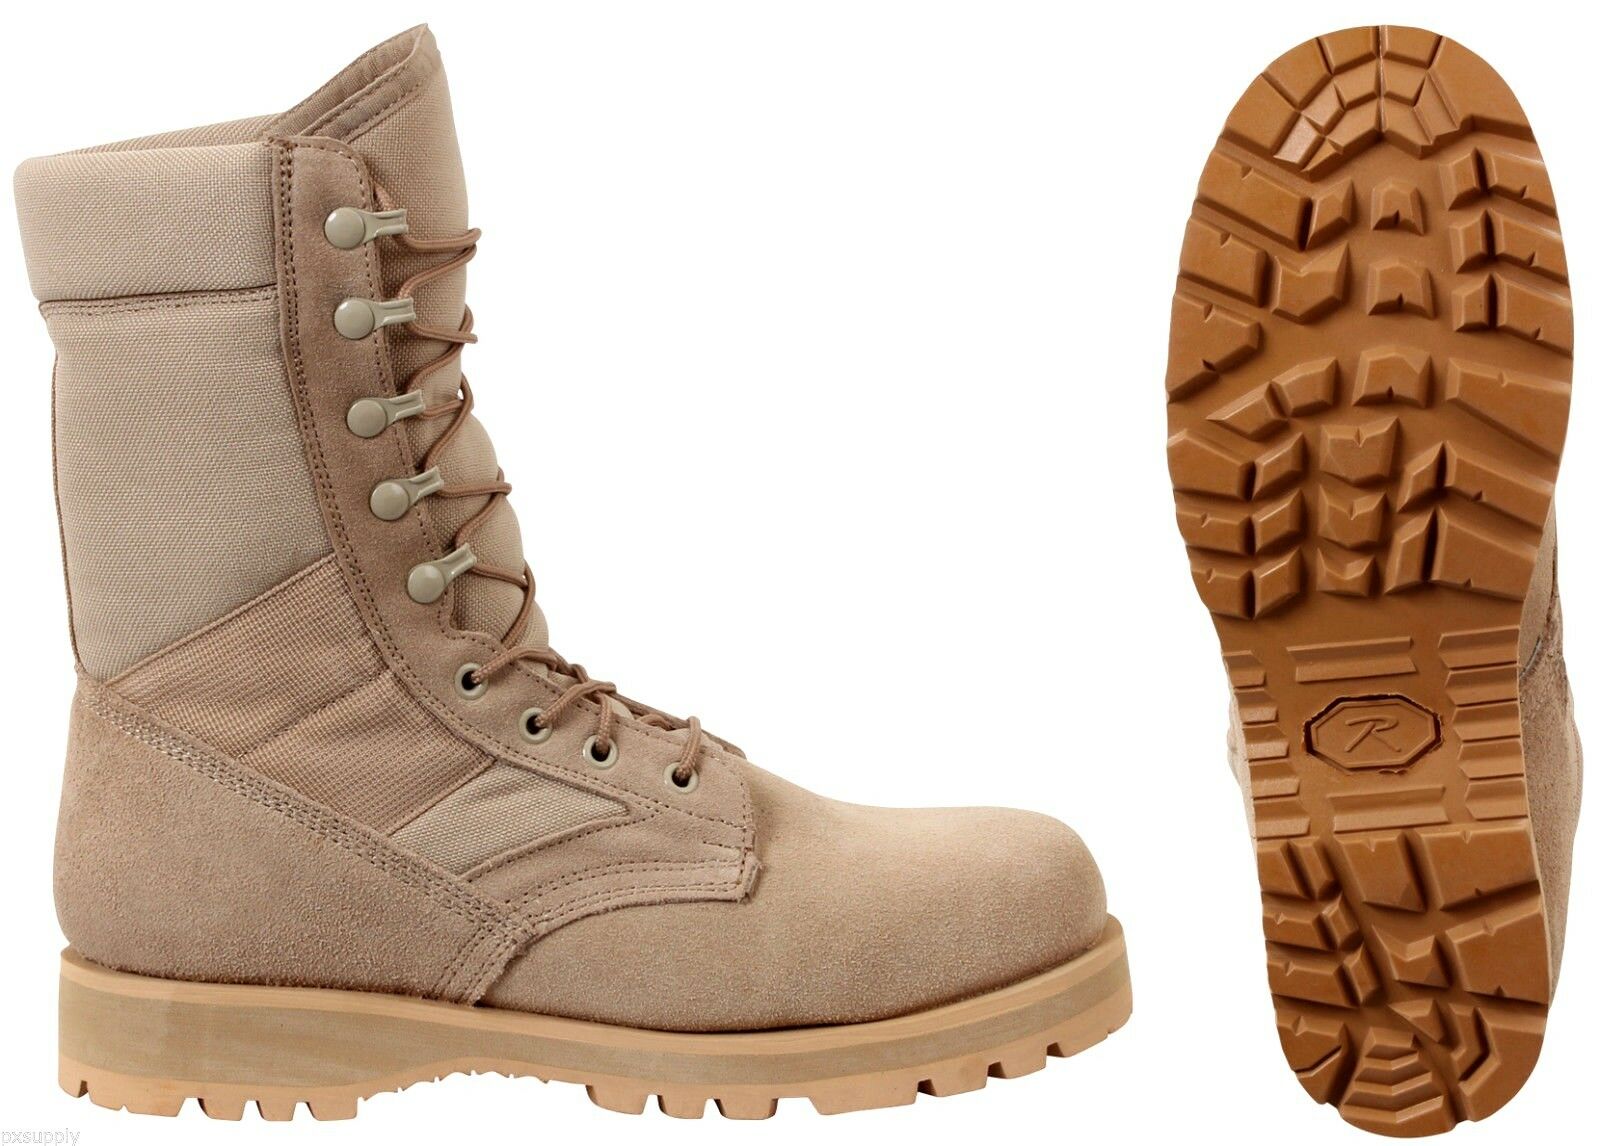 Rothco G.I. Type Sierra Sole Tactical Boots - Desert Sand – PX